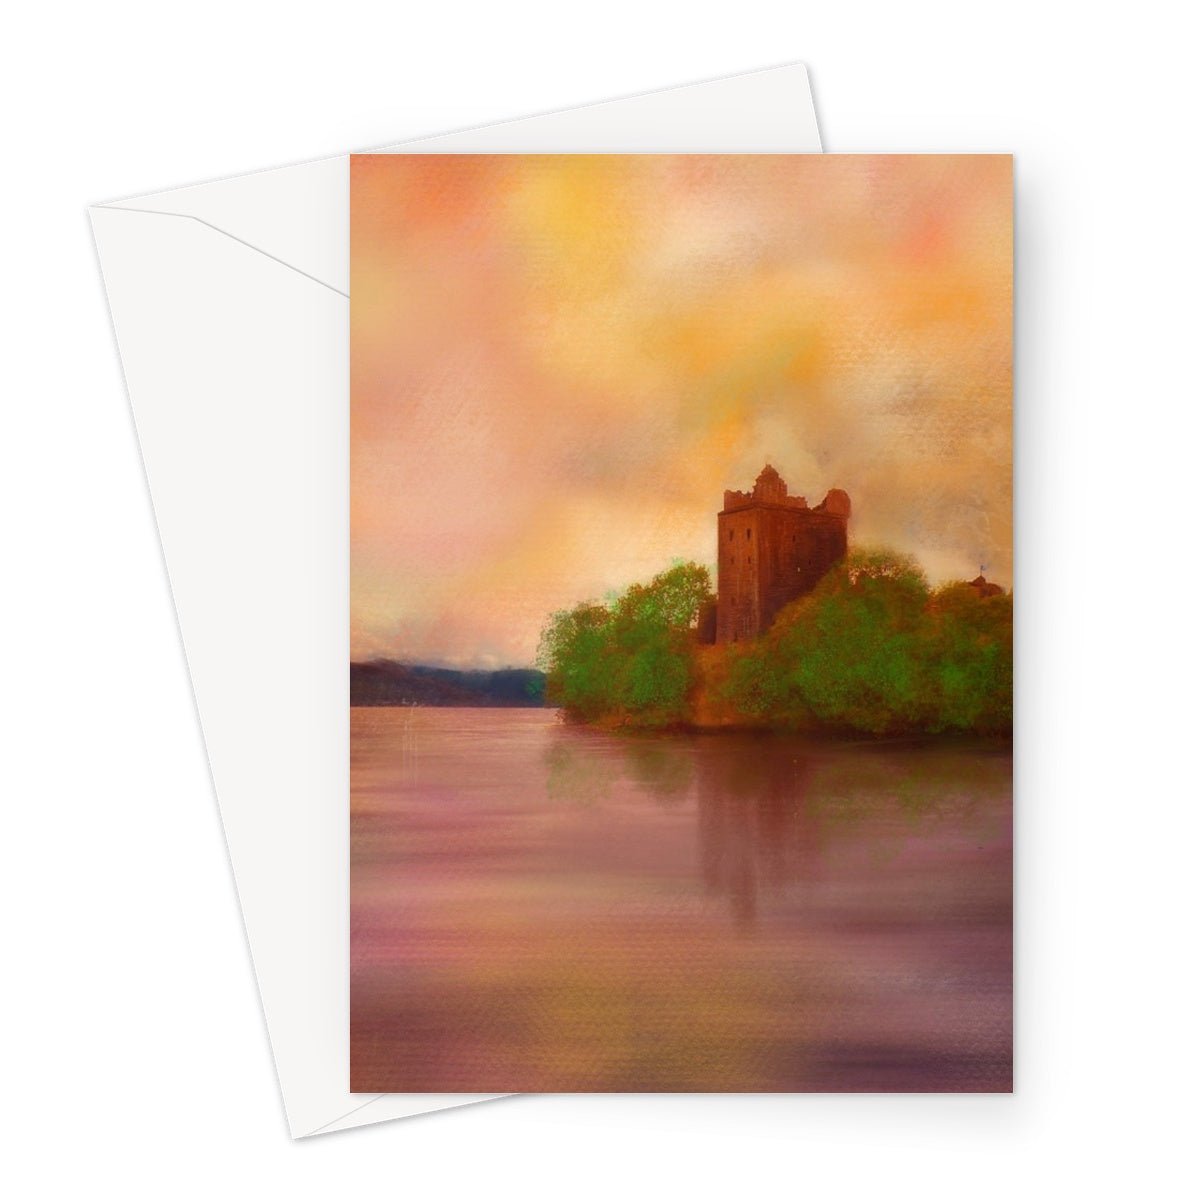 Urquhart Castle Art Gifts Greeting Card-Greetings Cards-Scottish Castles Art Gallery-A5 Portrait-1 Card-Paintings, Prints, Homeware, Art Gifts From Scotland By Scottish Artist Kevin Hunter